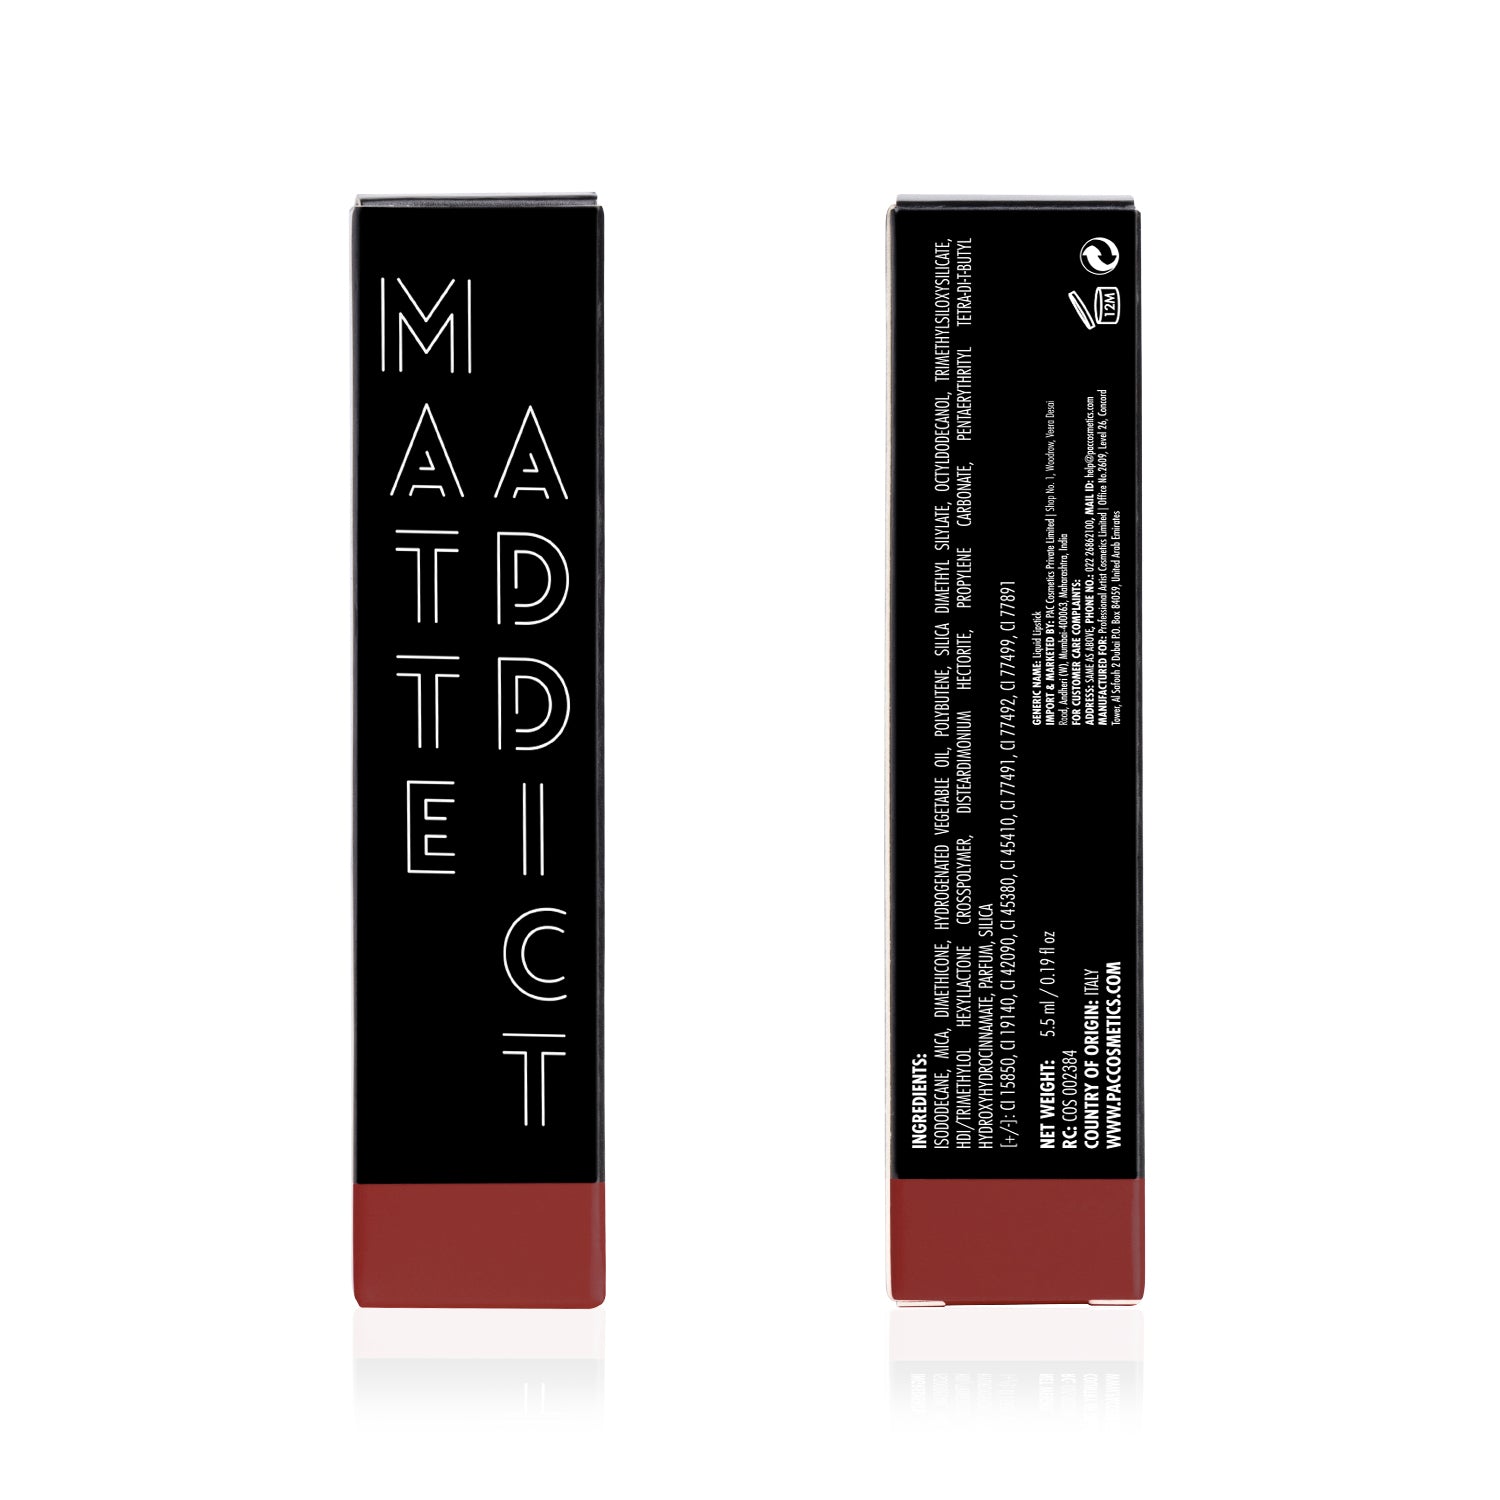 PAC Cosmetics Matte Addict #Size_5.5 ml+#Color_Killing Me Softly